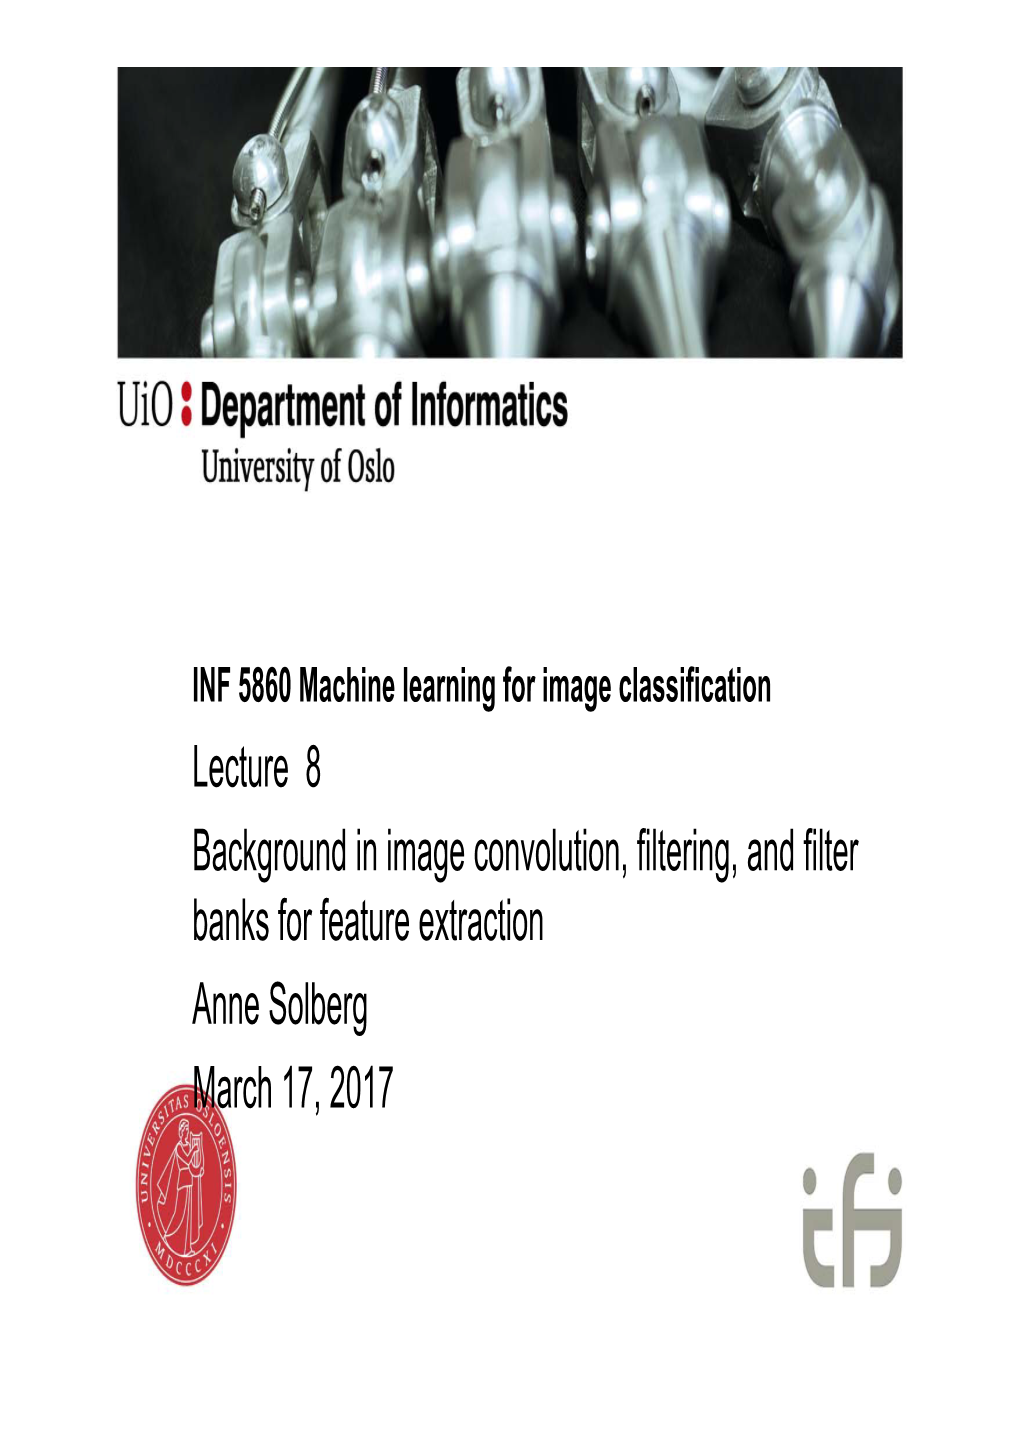 Lecture 8 Background in Image Convolution, Filtering, and Filter Banks for Feature Extraction Anne Solberg March 17, 2017 Today